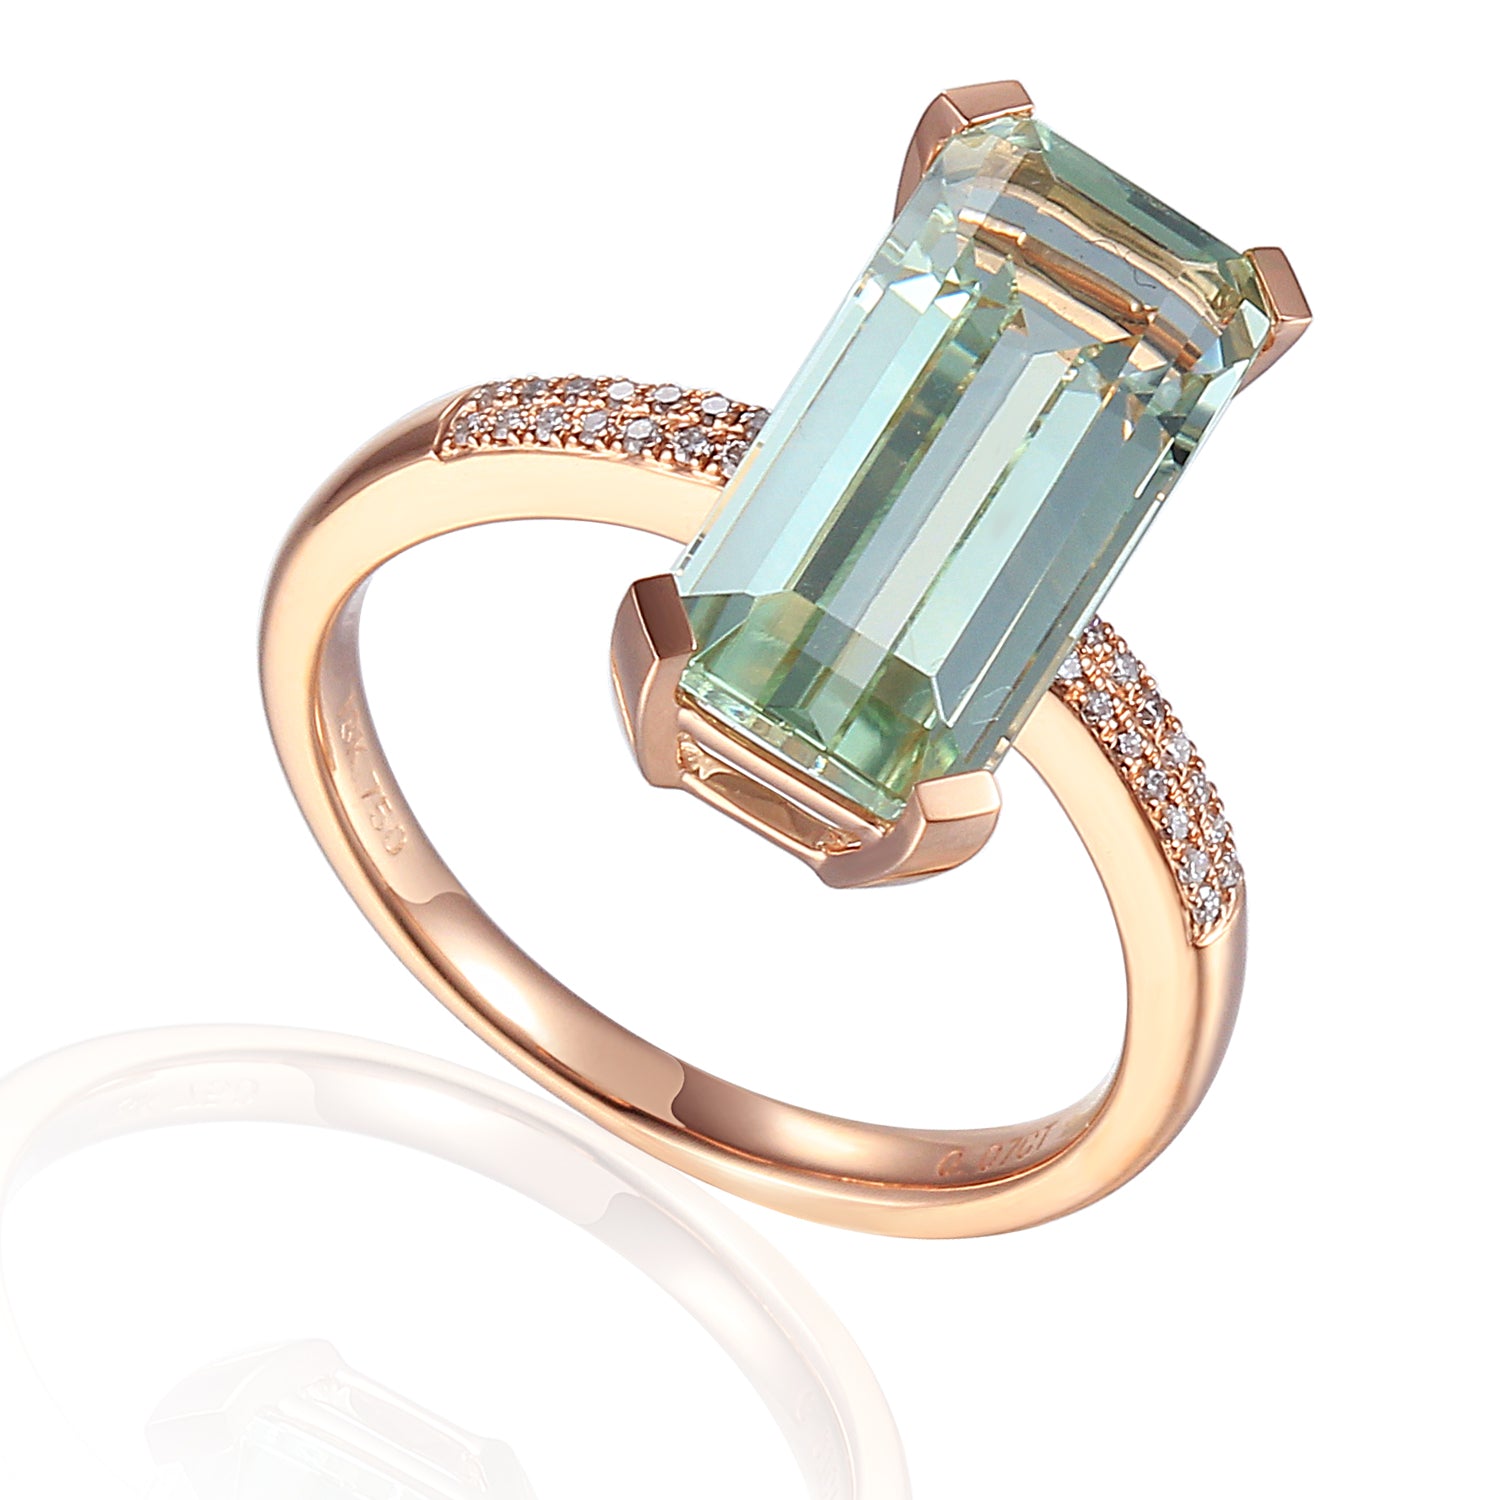 Long octagon Gemstone Ring with Pave Diamond Shoulders